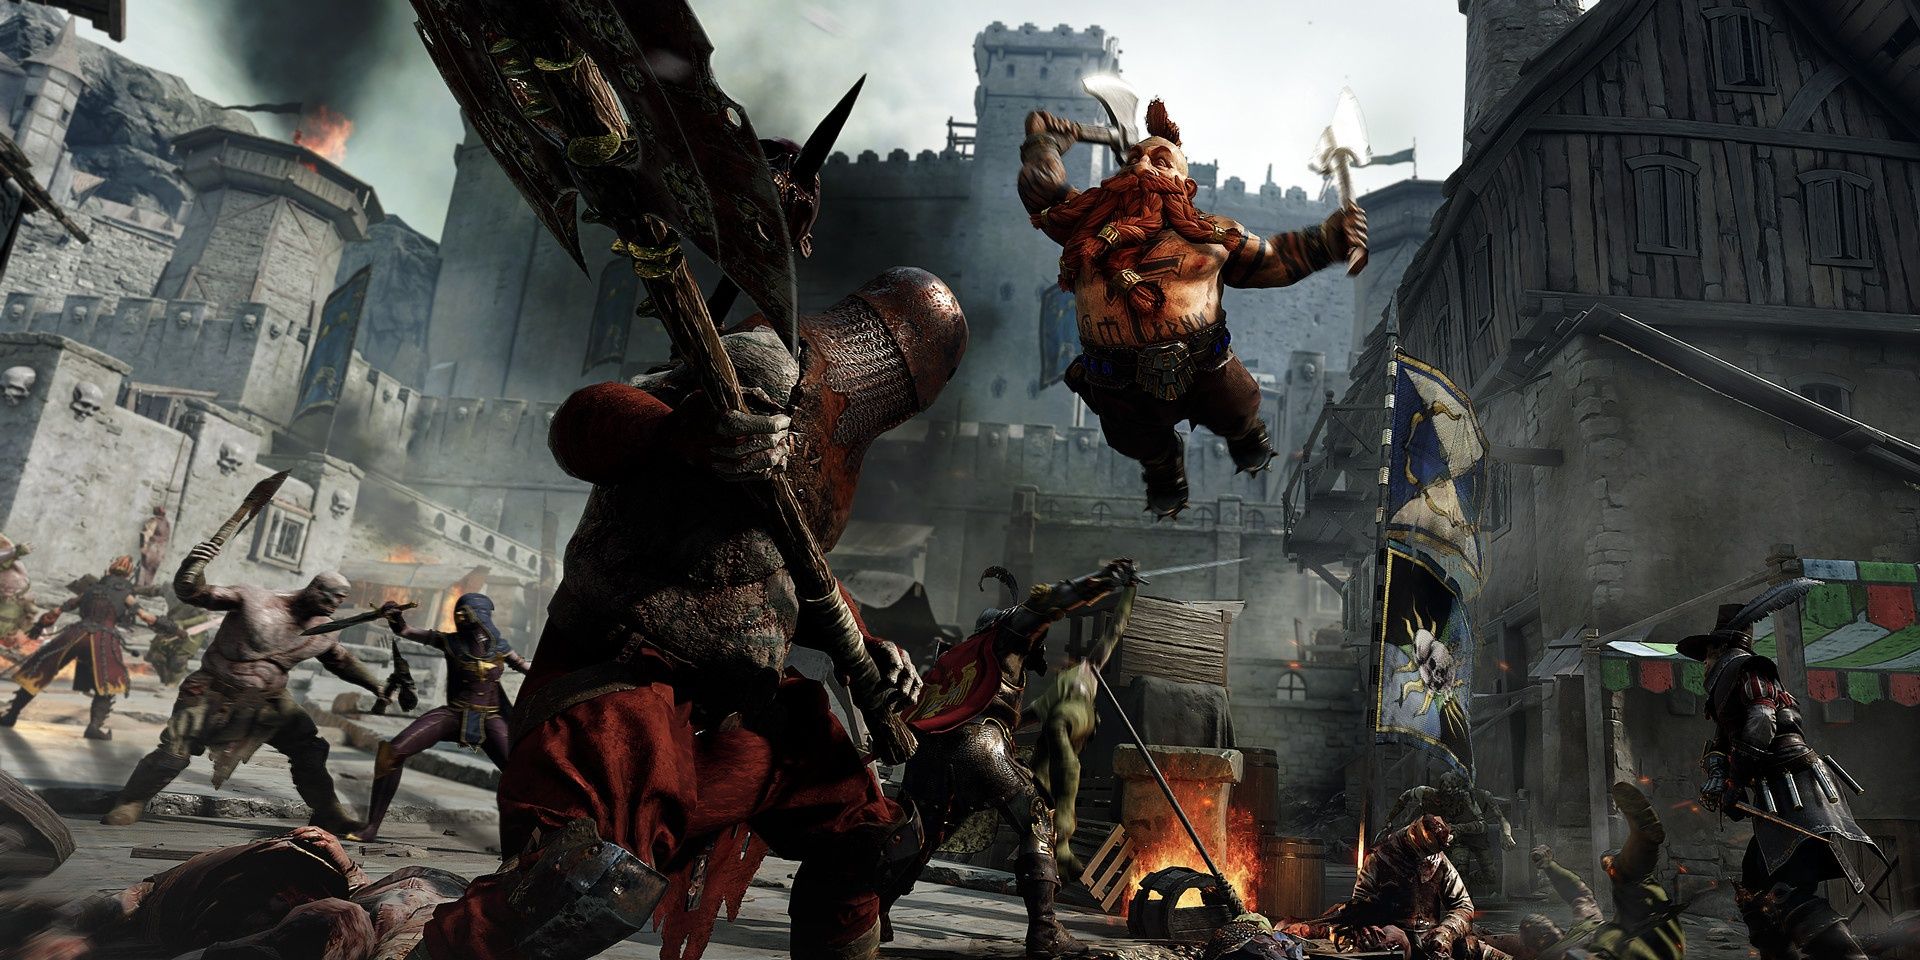 A dwarf leaping from the ground wielding two axes going towards a person wielding a giant battle axe in Warhammer: Vermintide 2